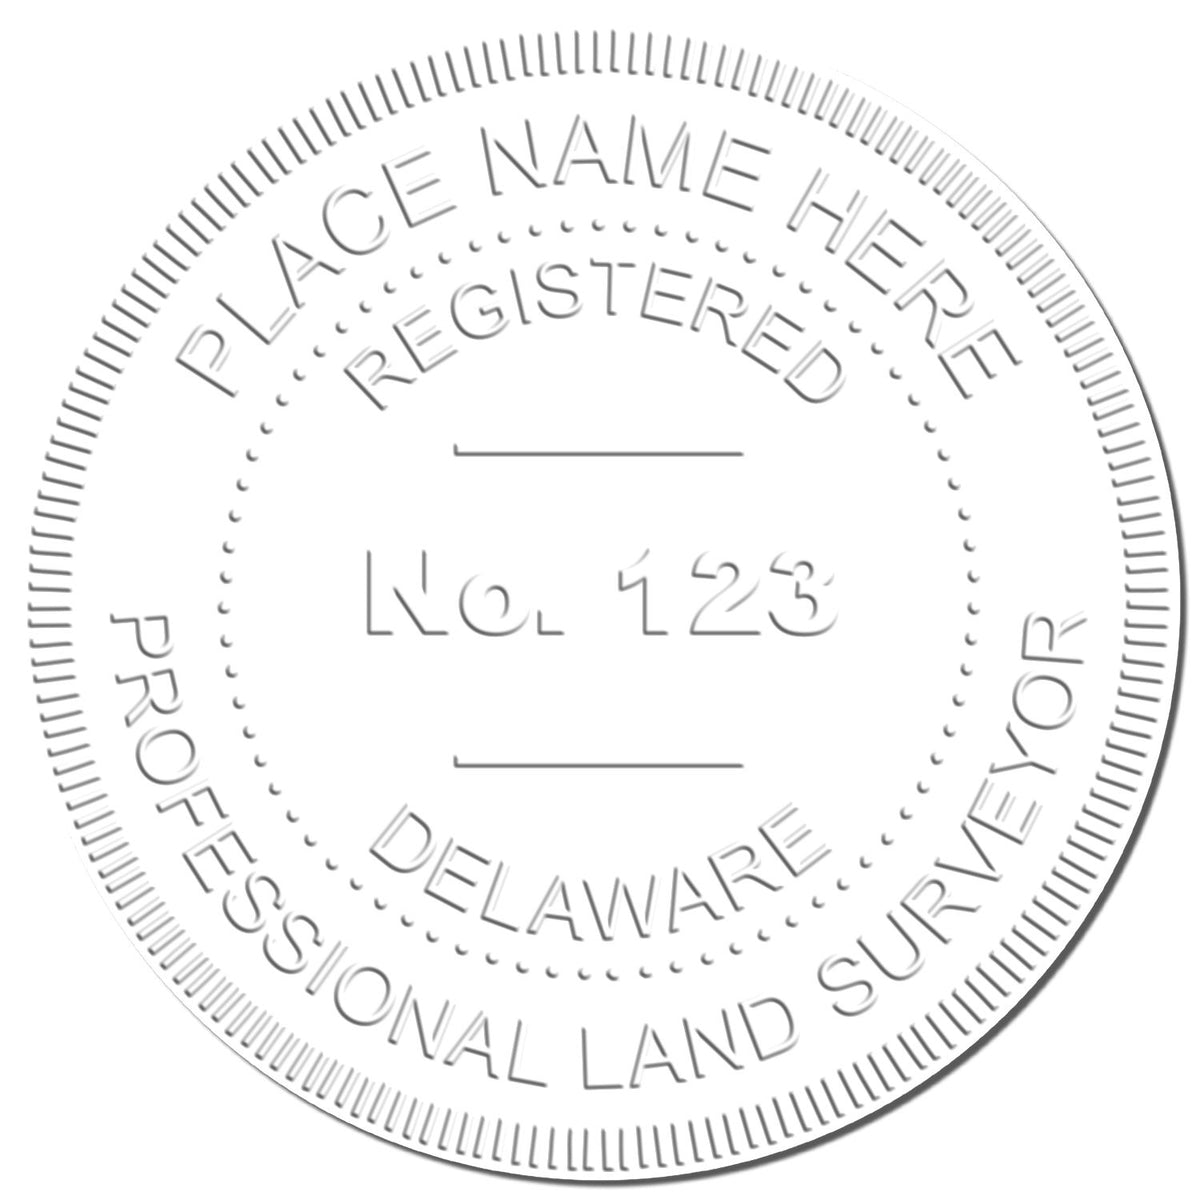 This paper is stamped with a sample imprint of the Heavy Duty Cast Iron Delaware Land Surveyor Seal Embosser, signifying its quality and reliability.